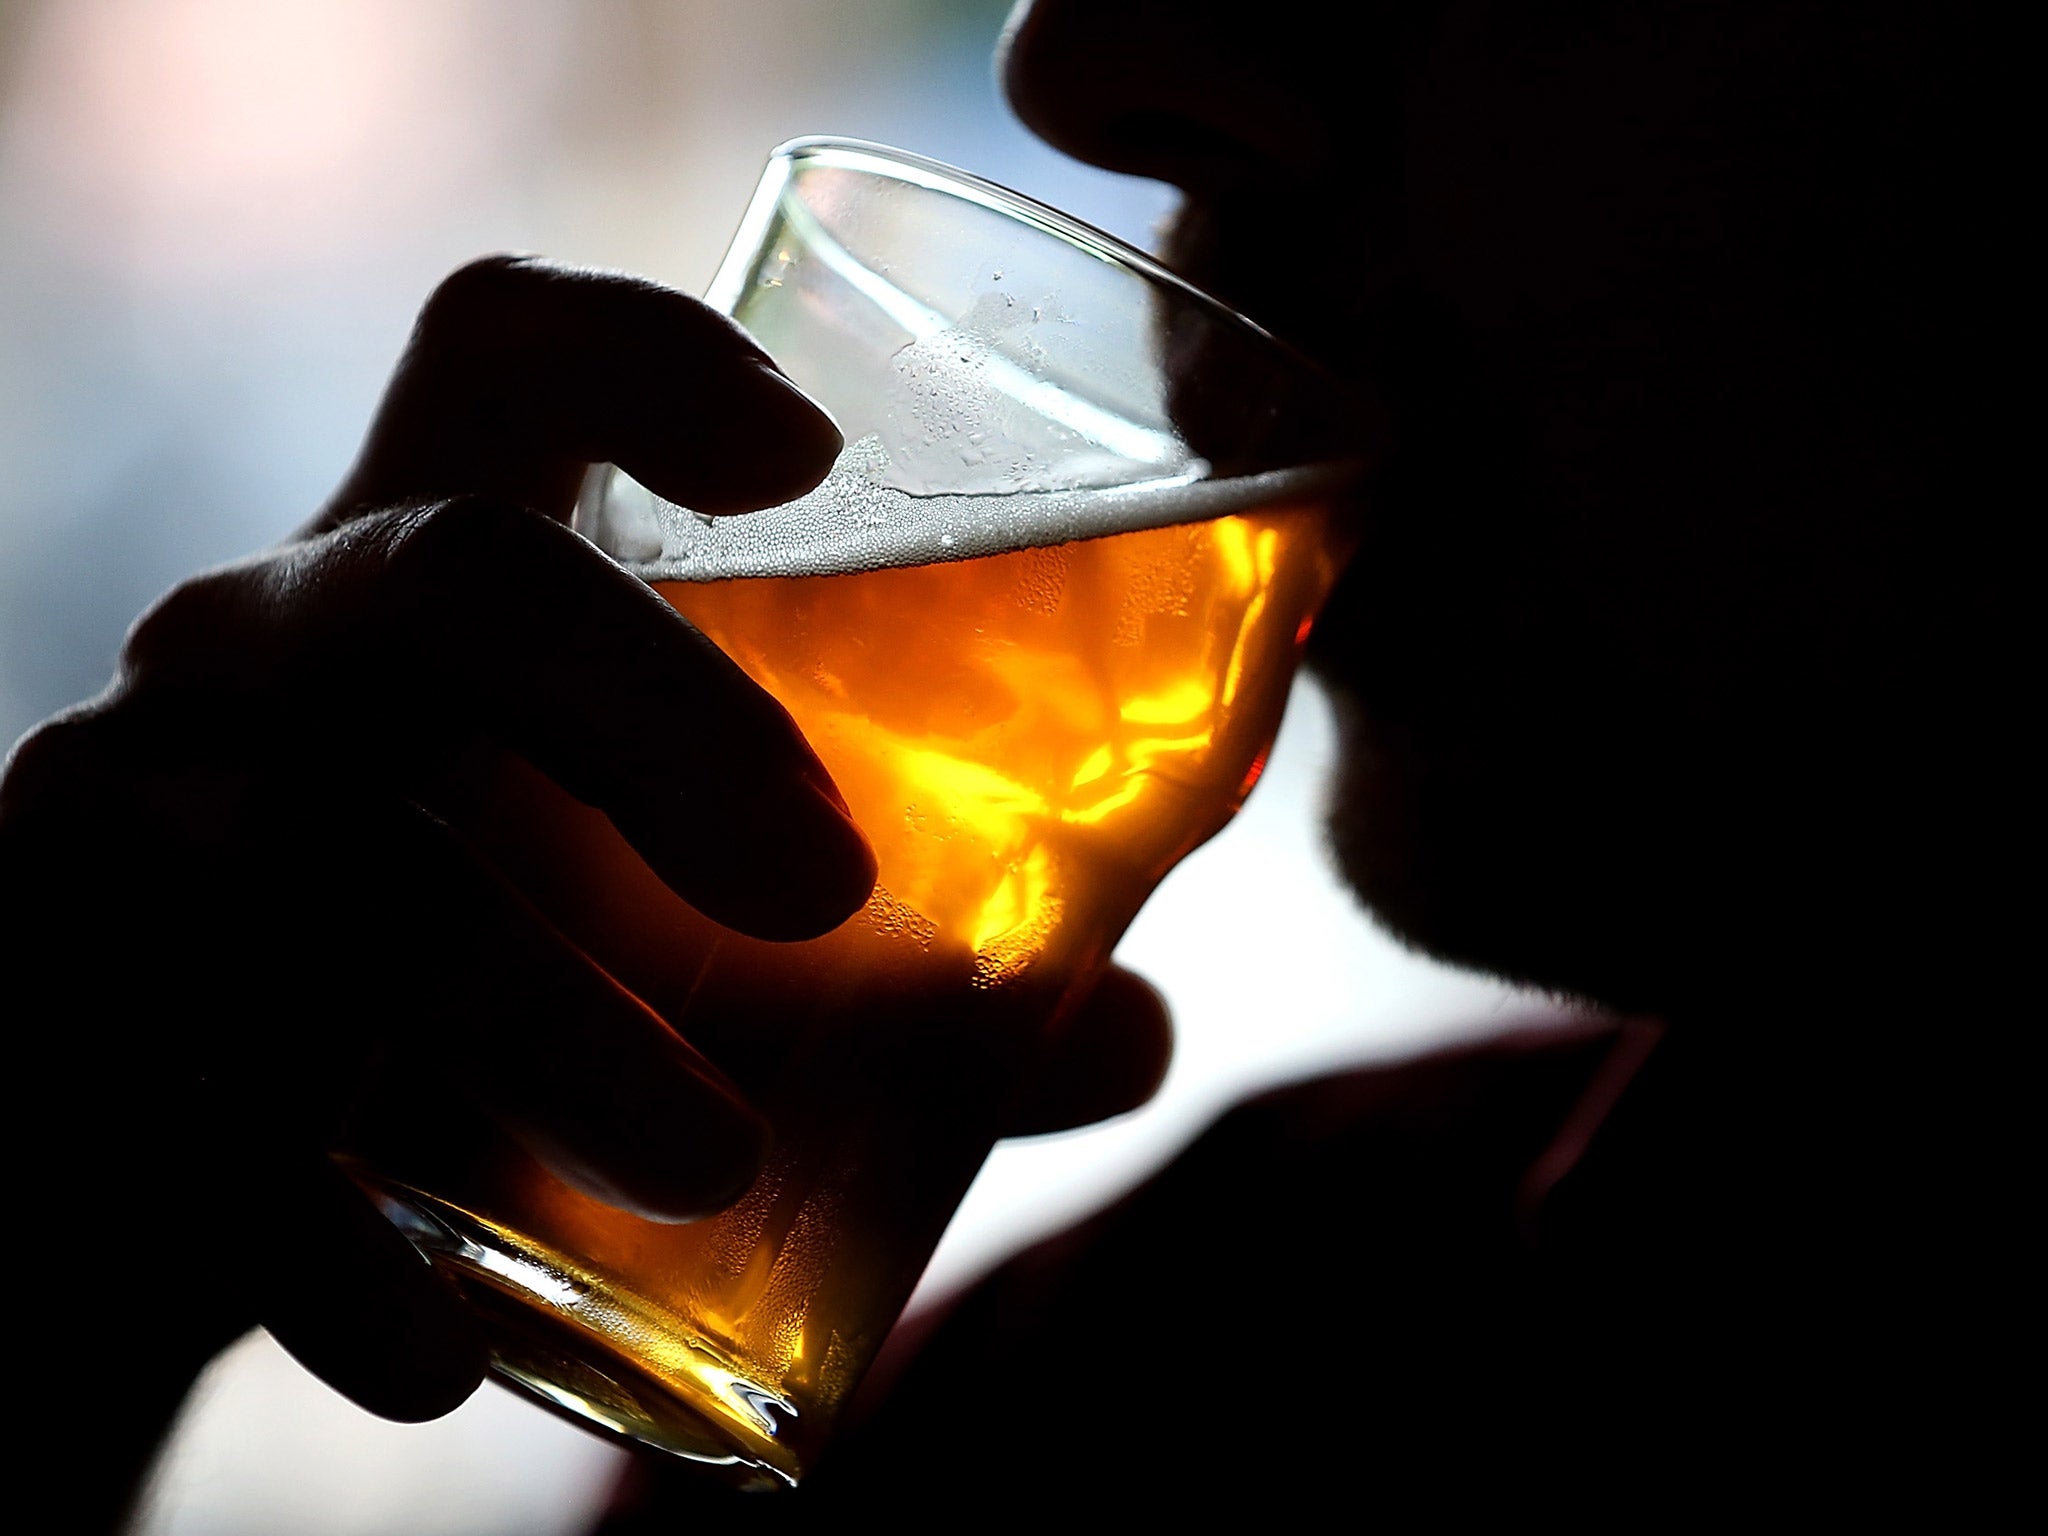 Alcohol misuse is higher in the military than in civilian populations, according to research